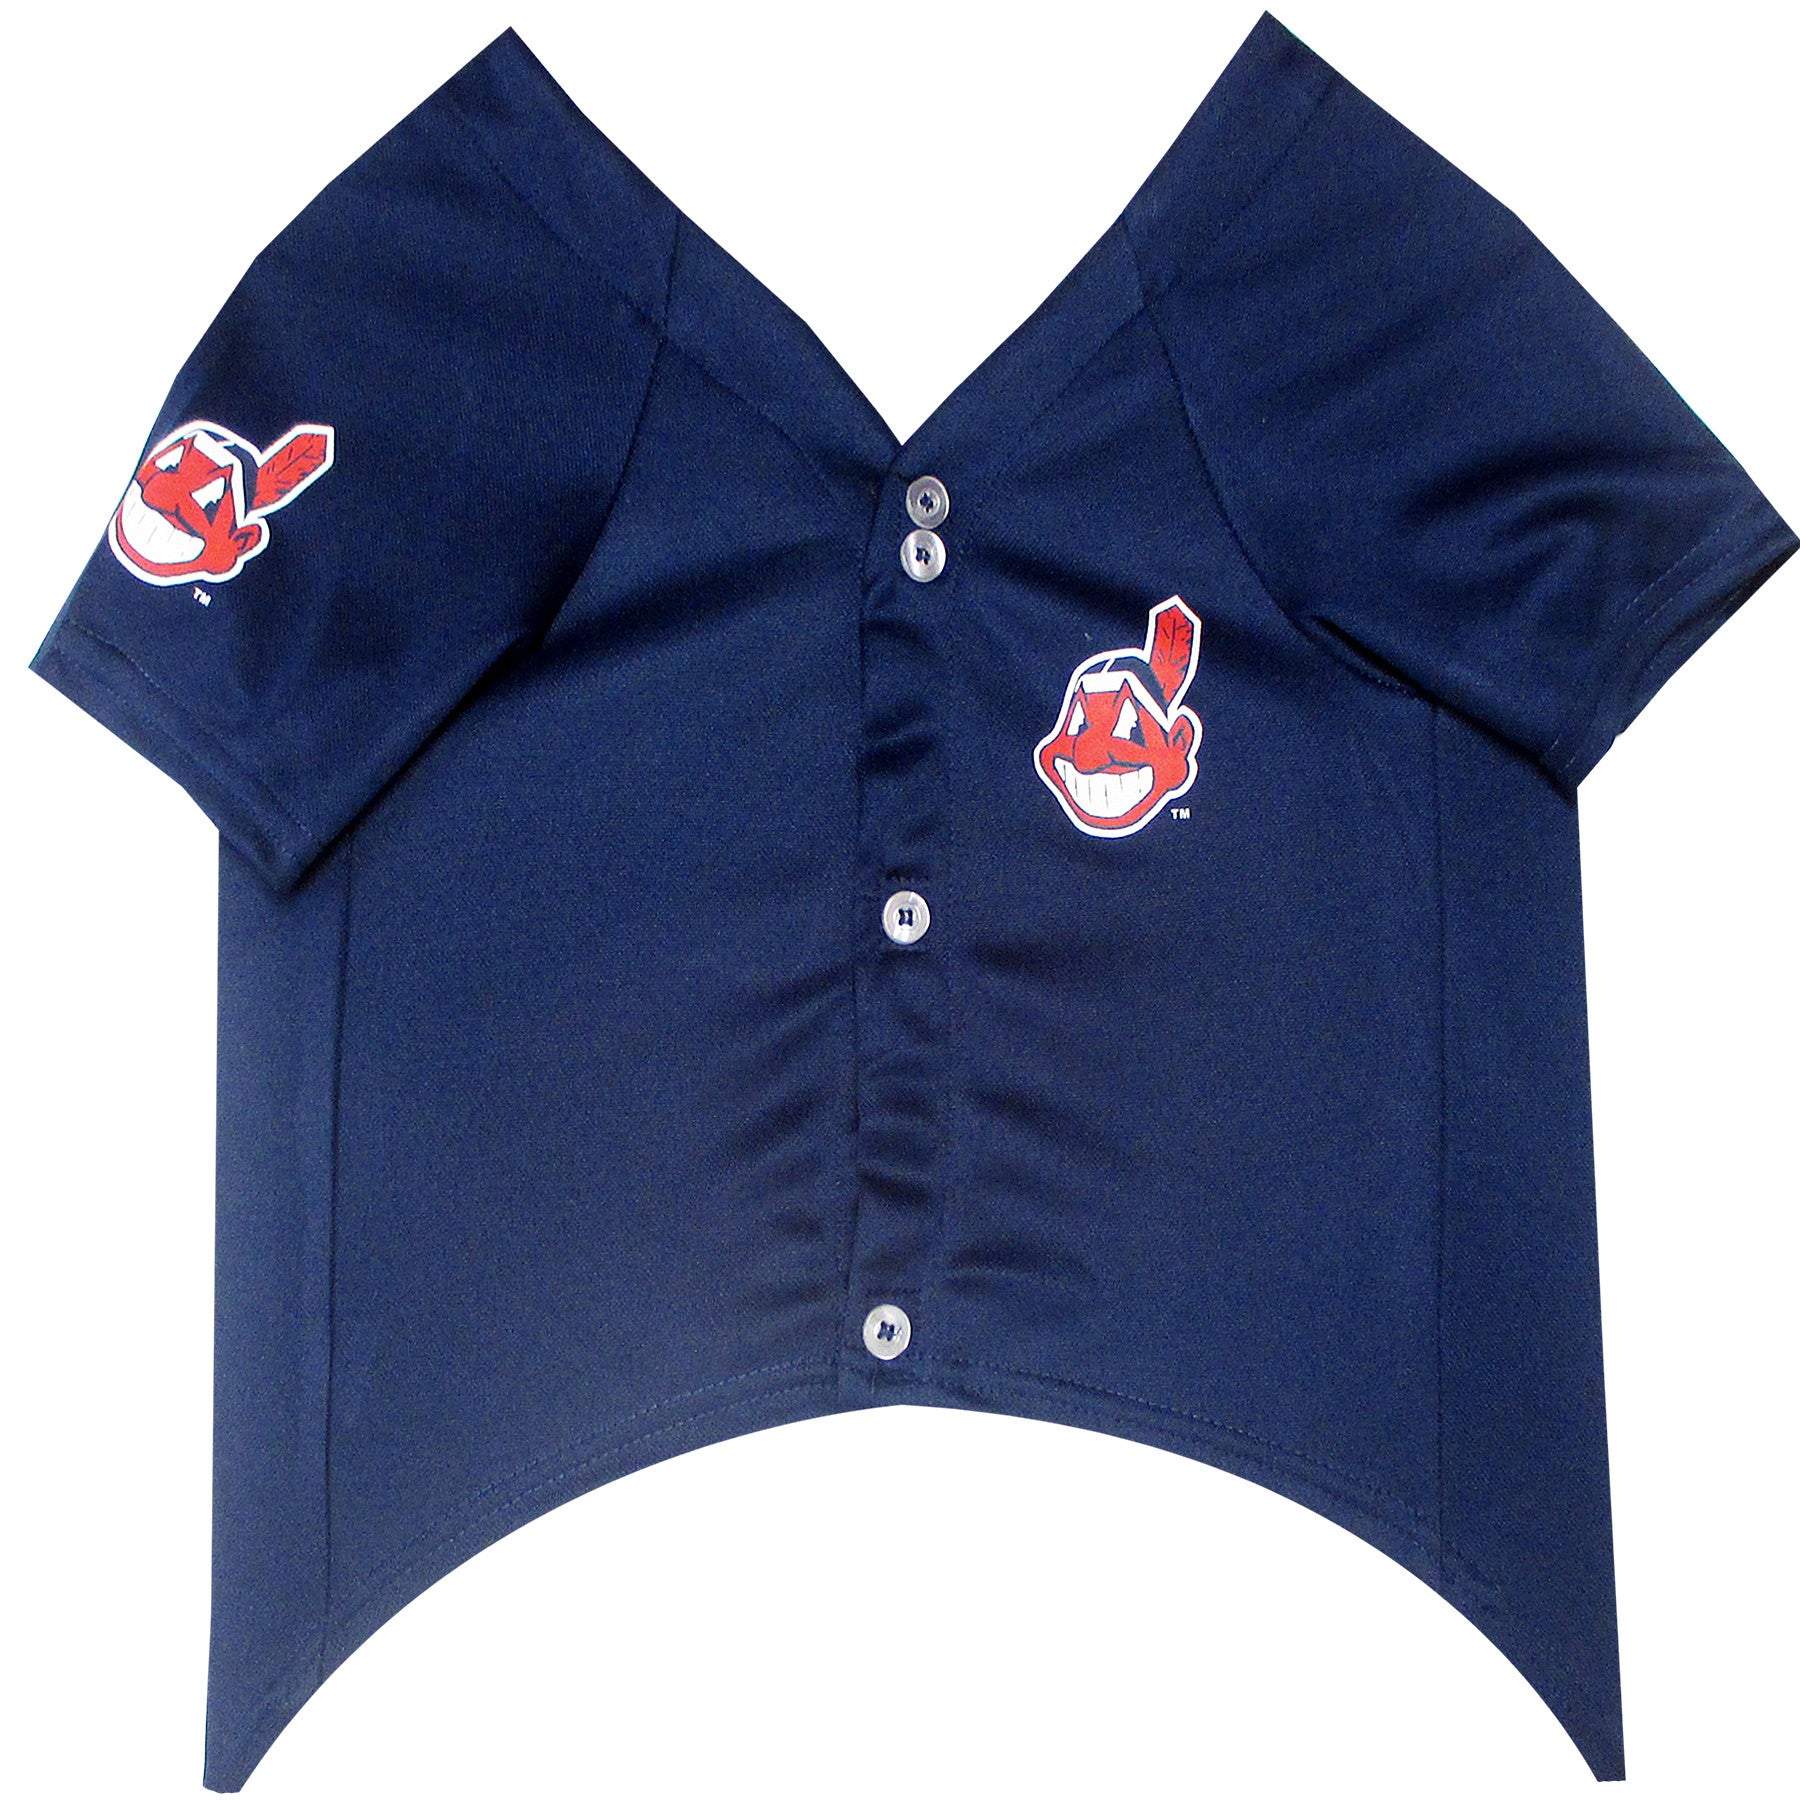 indians dog jersey